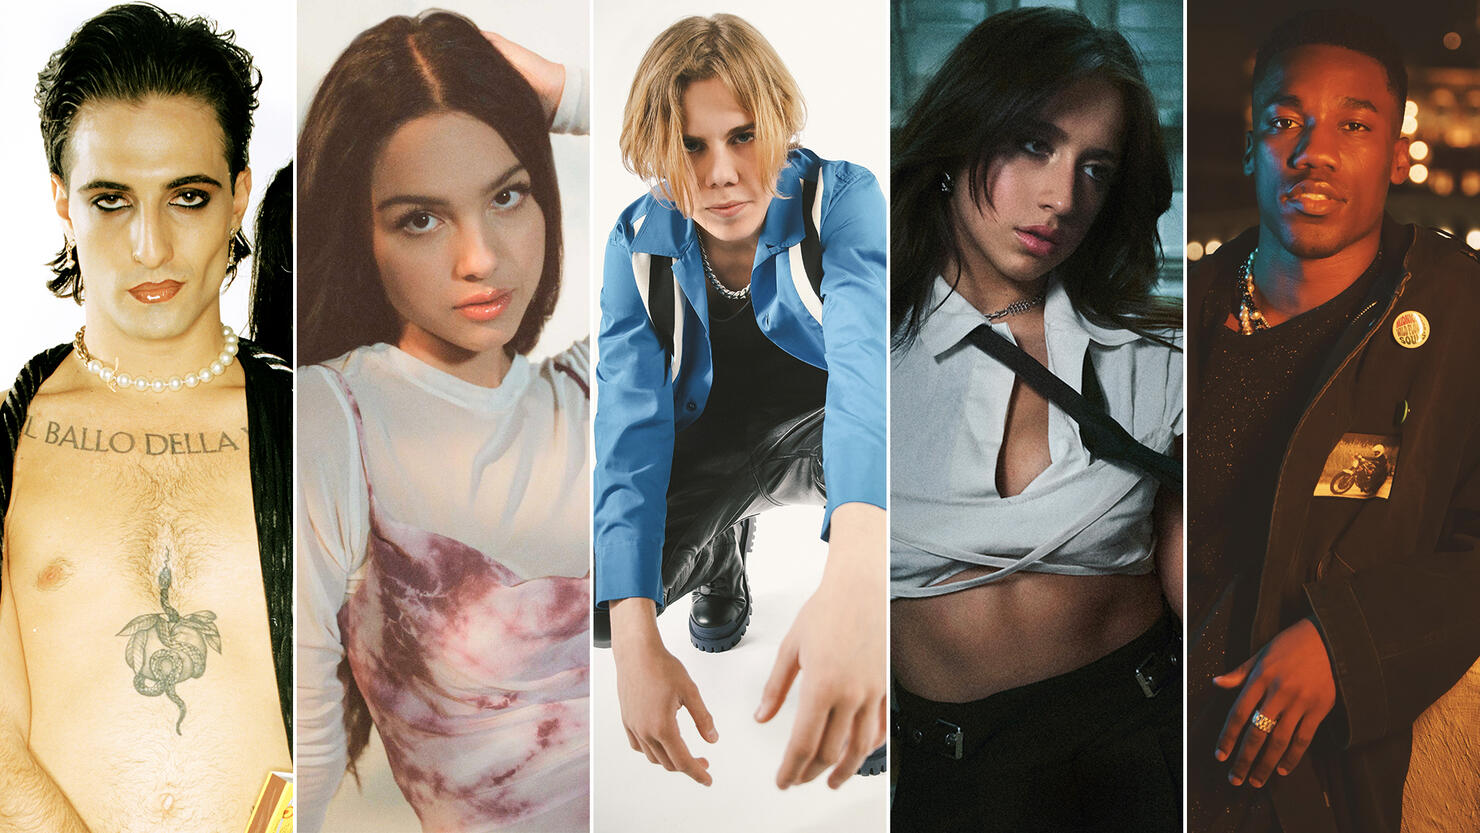 5 New Pop Artists You Need To Know Before The 2022 iHeartRadio Music